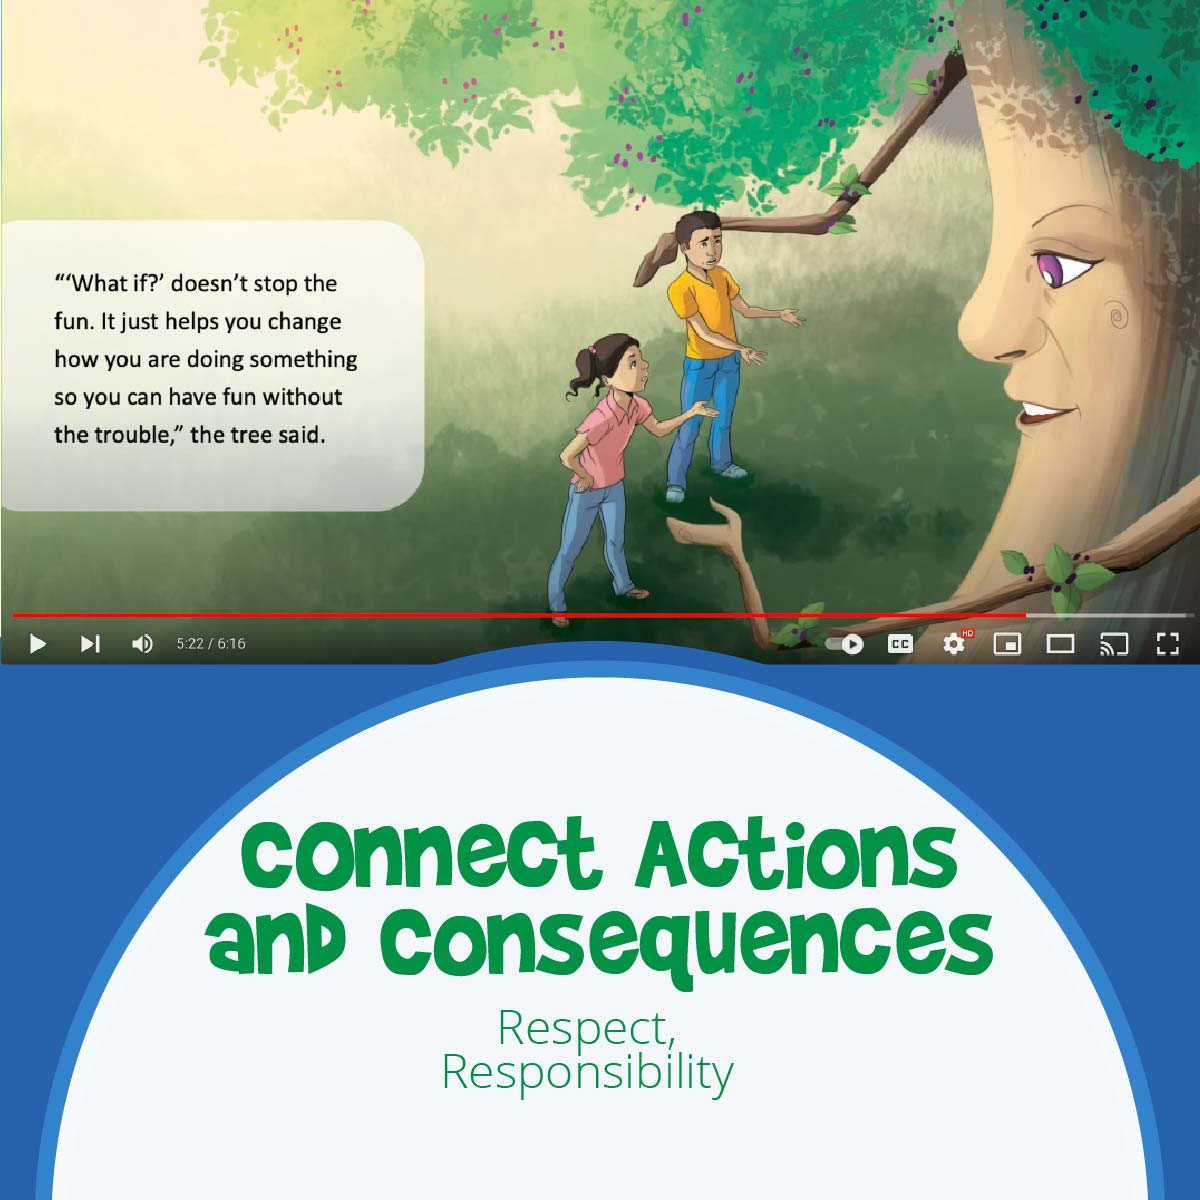 What if? A good character and values video on respect and responsibility